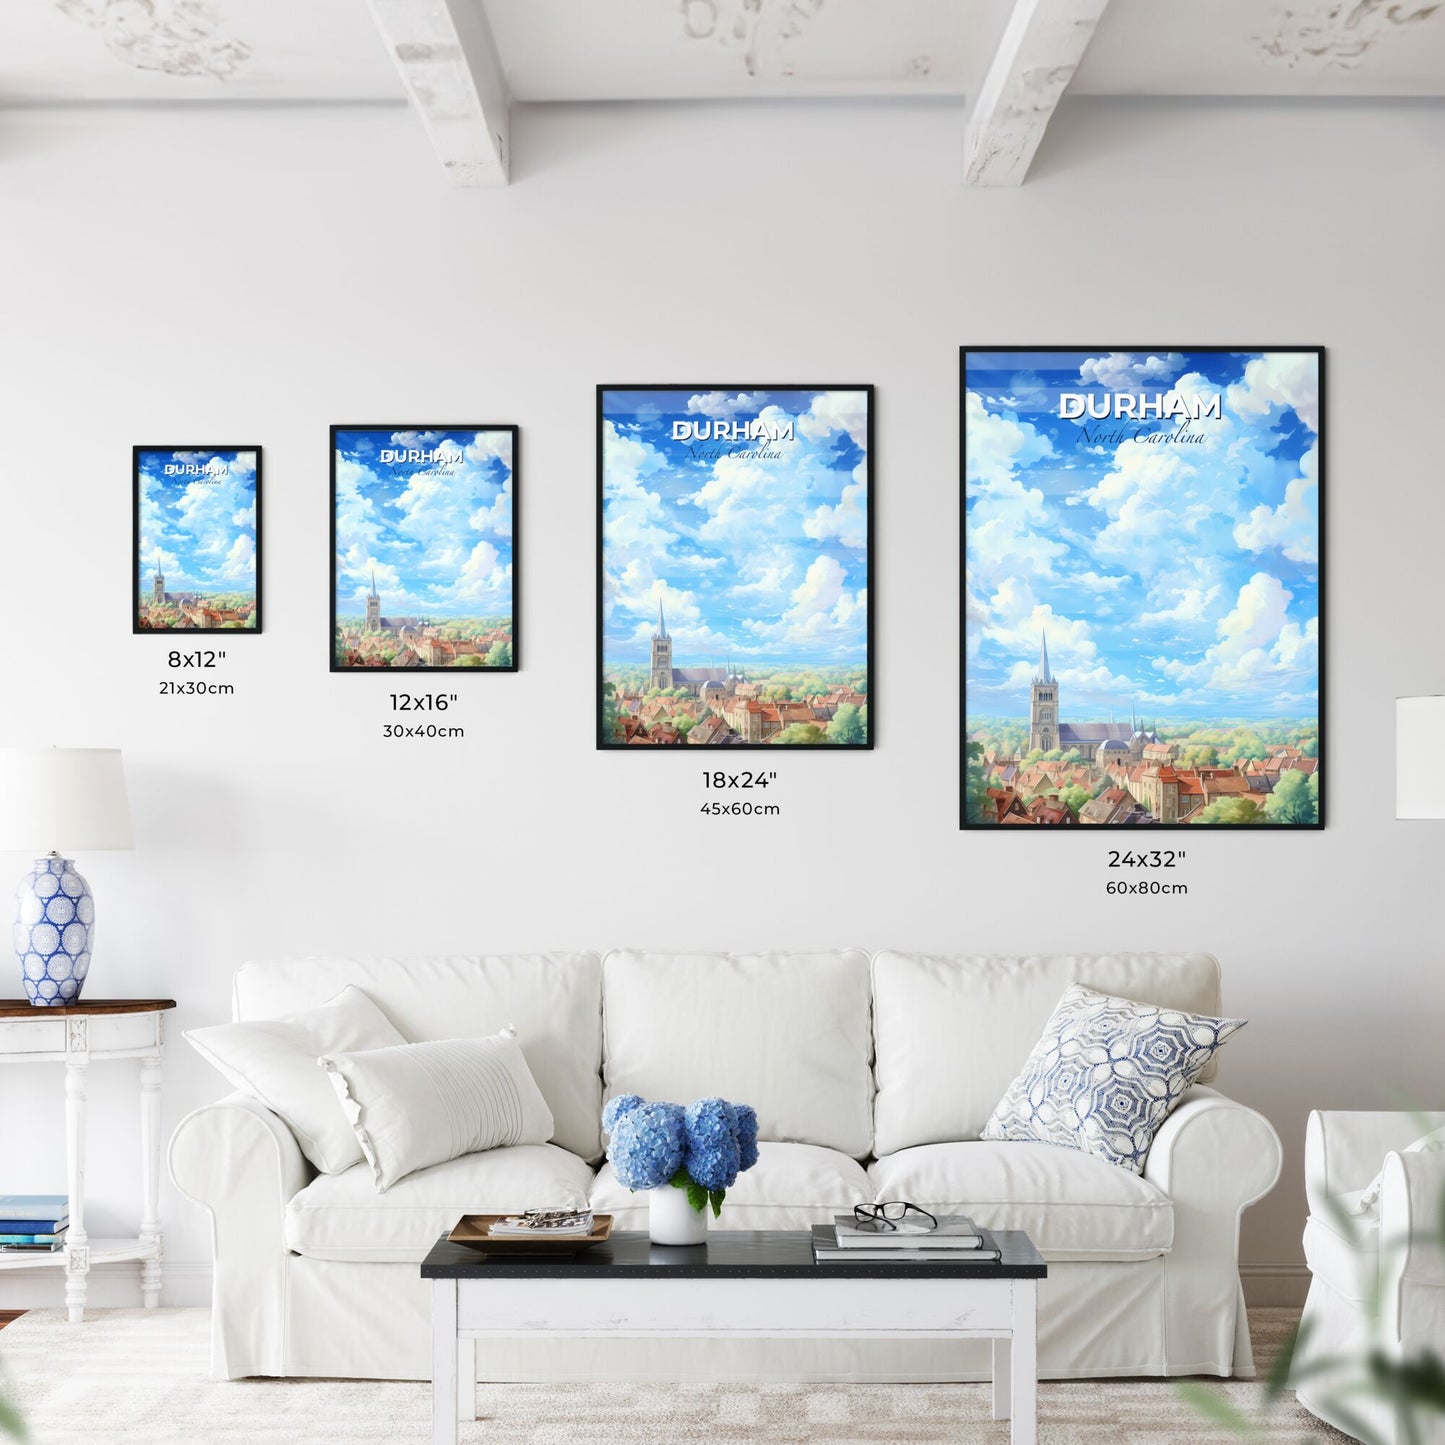 Durham North Carolina Skyline - A Church And Buildings With Clouds In The Sky - Customizable Travel Gift Default Title